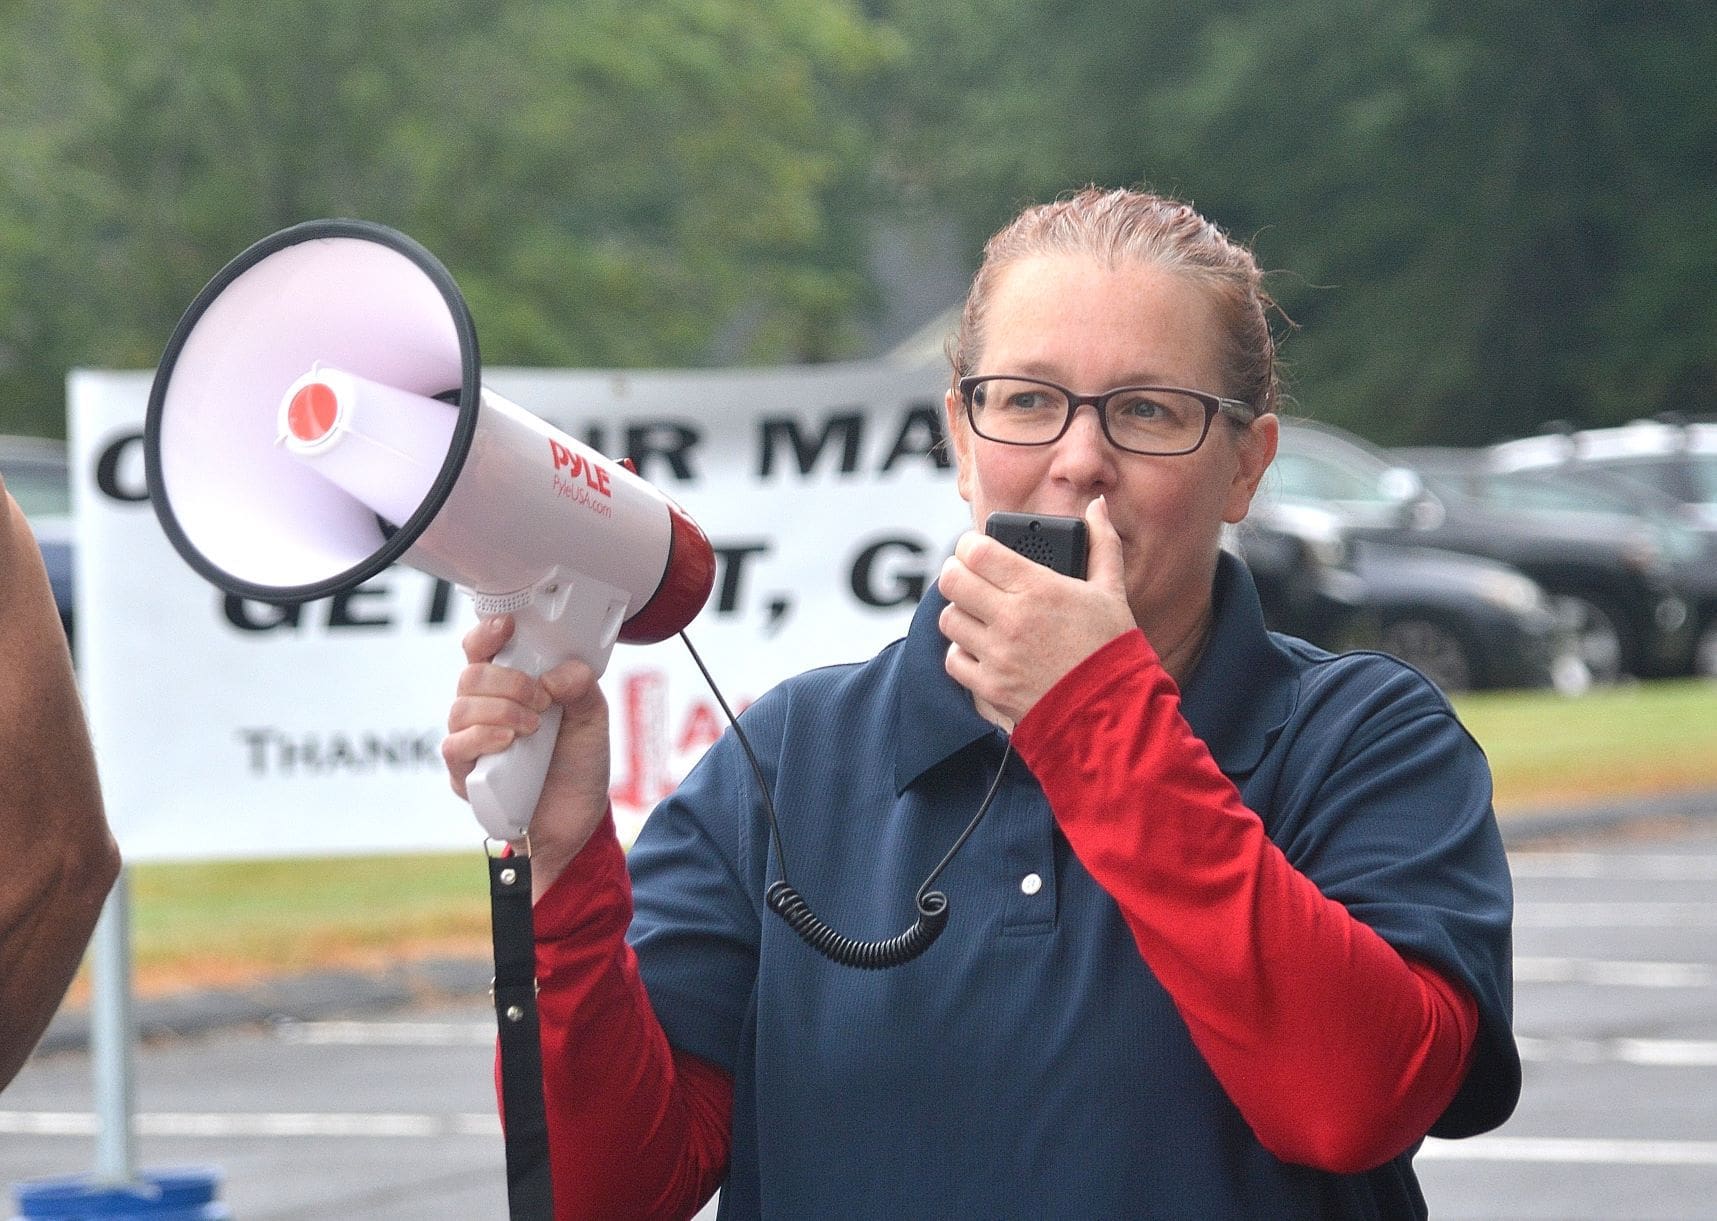 Karen Brewster, a founder of Boros Cares 4 Troops, welcomes the Applefest 5K Road Race participants.